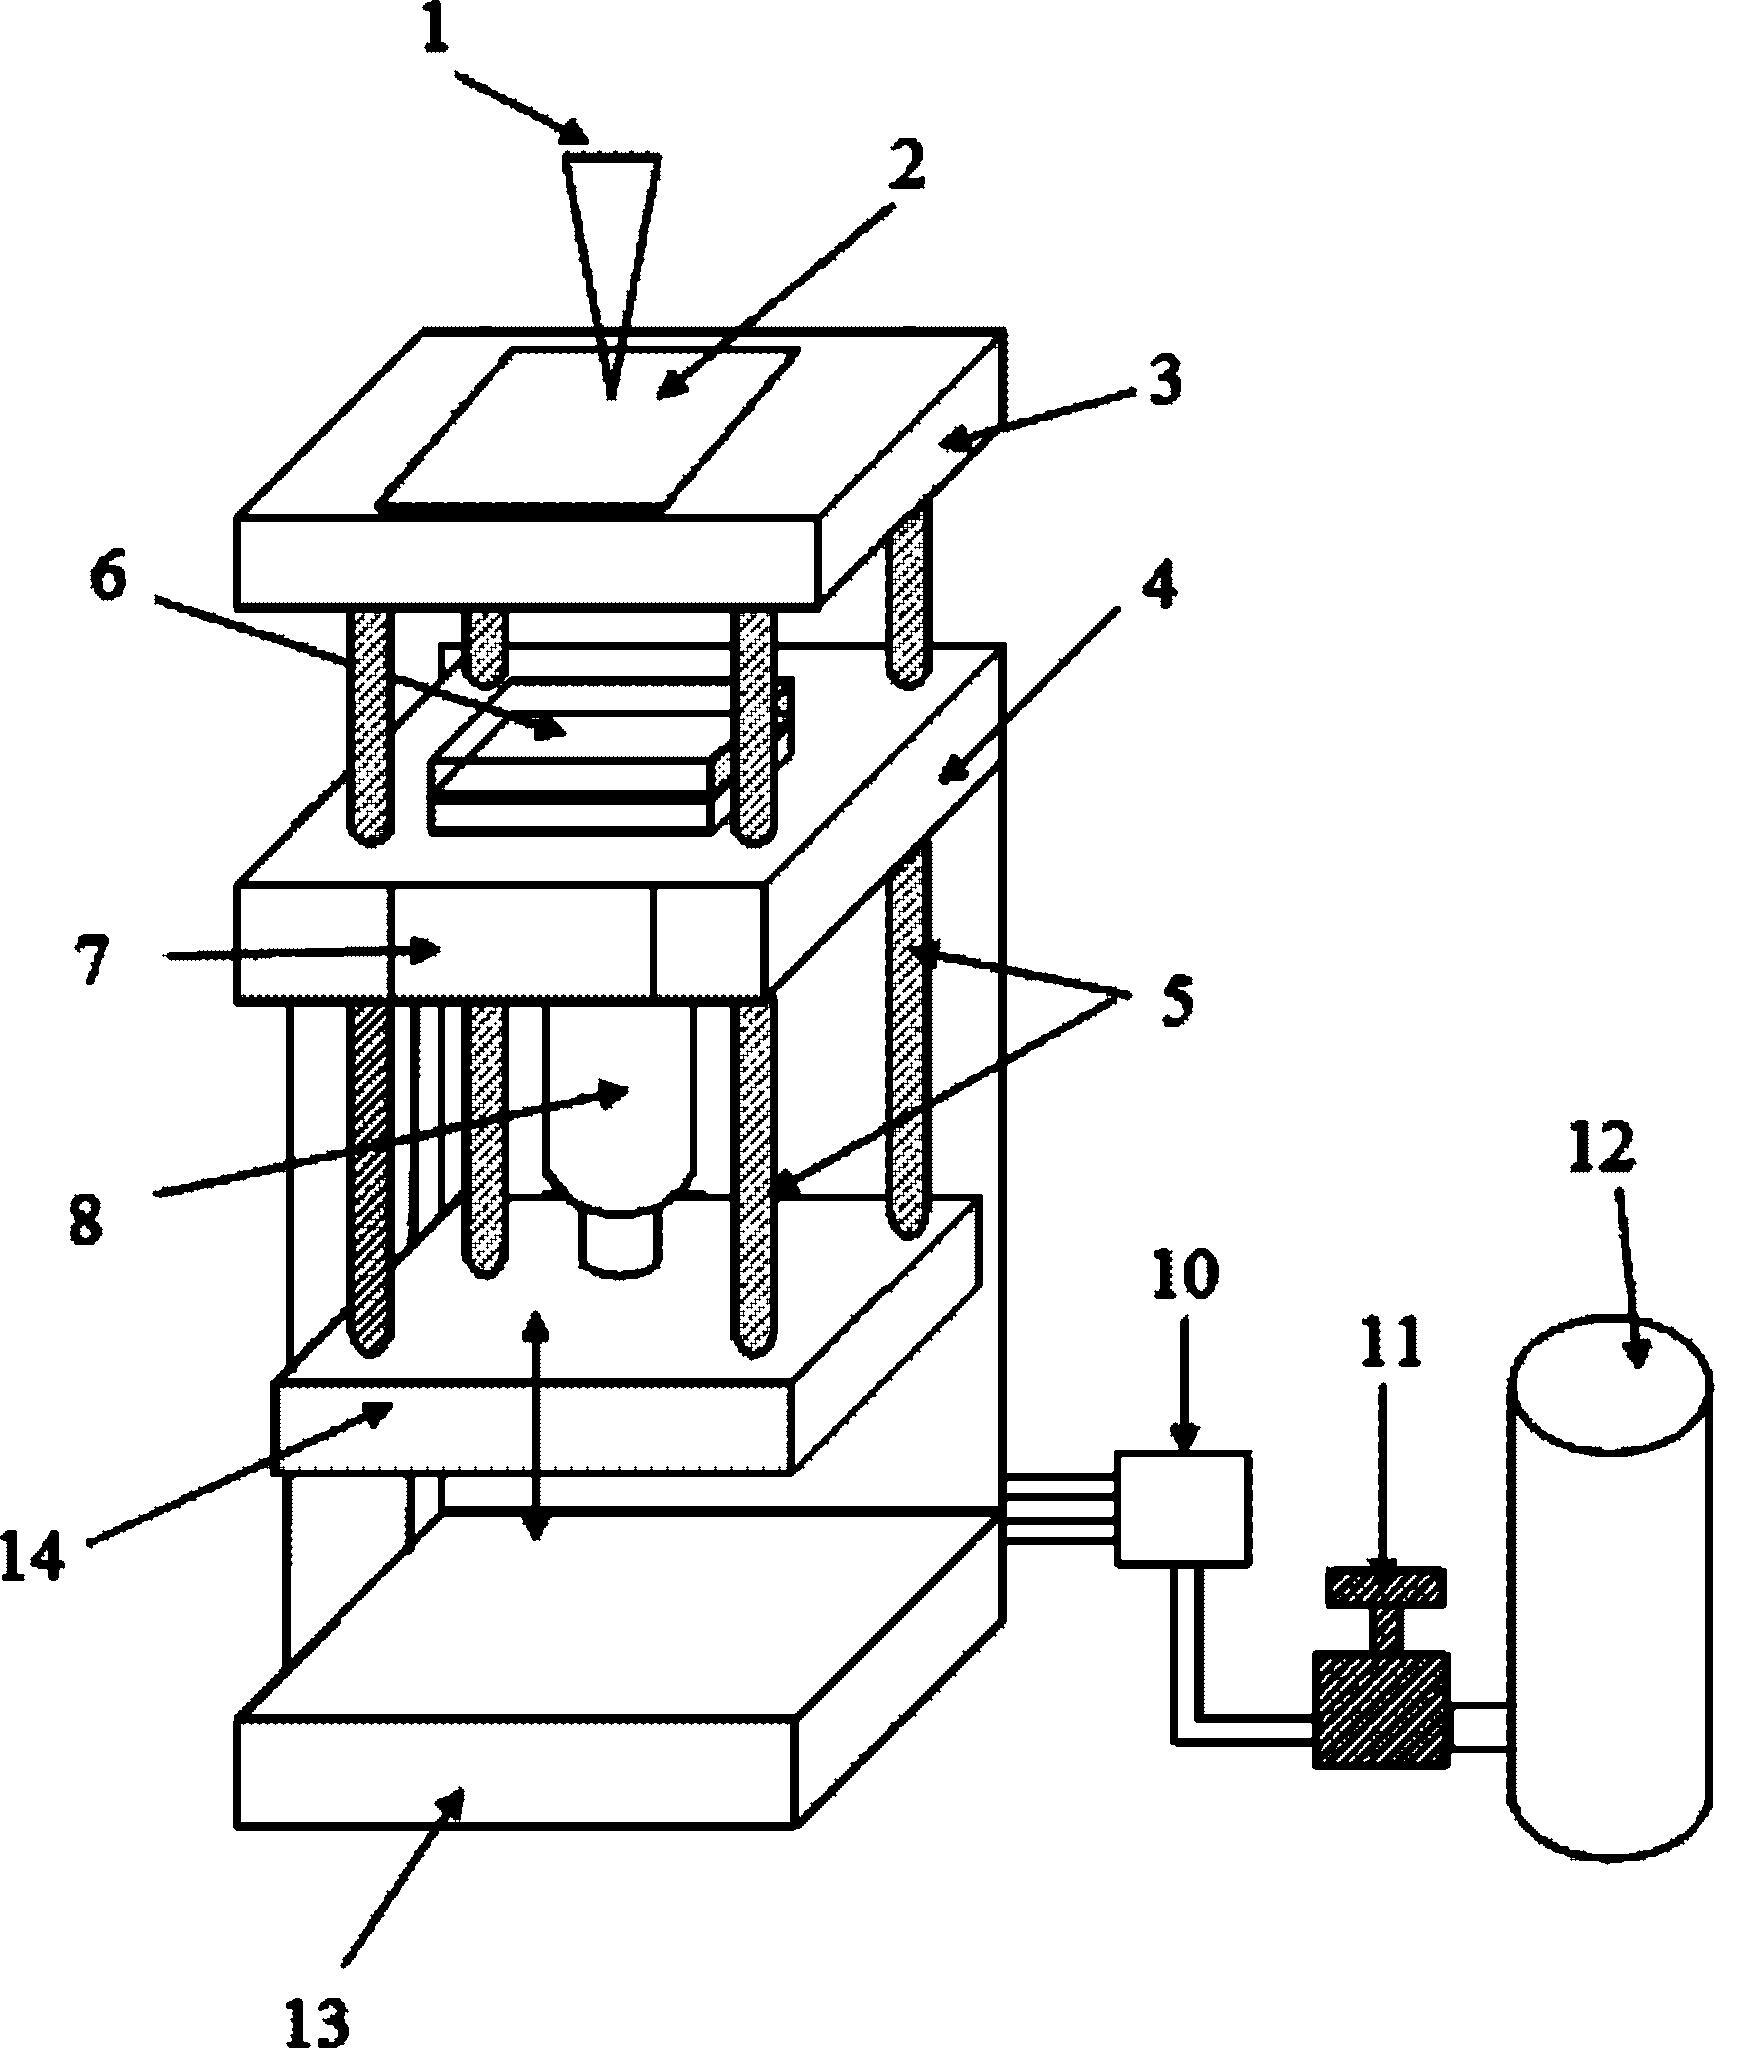 Device and method for welding plastic materials in laser transmission manner